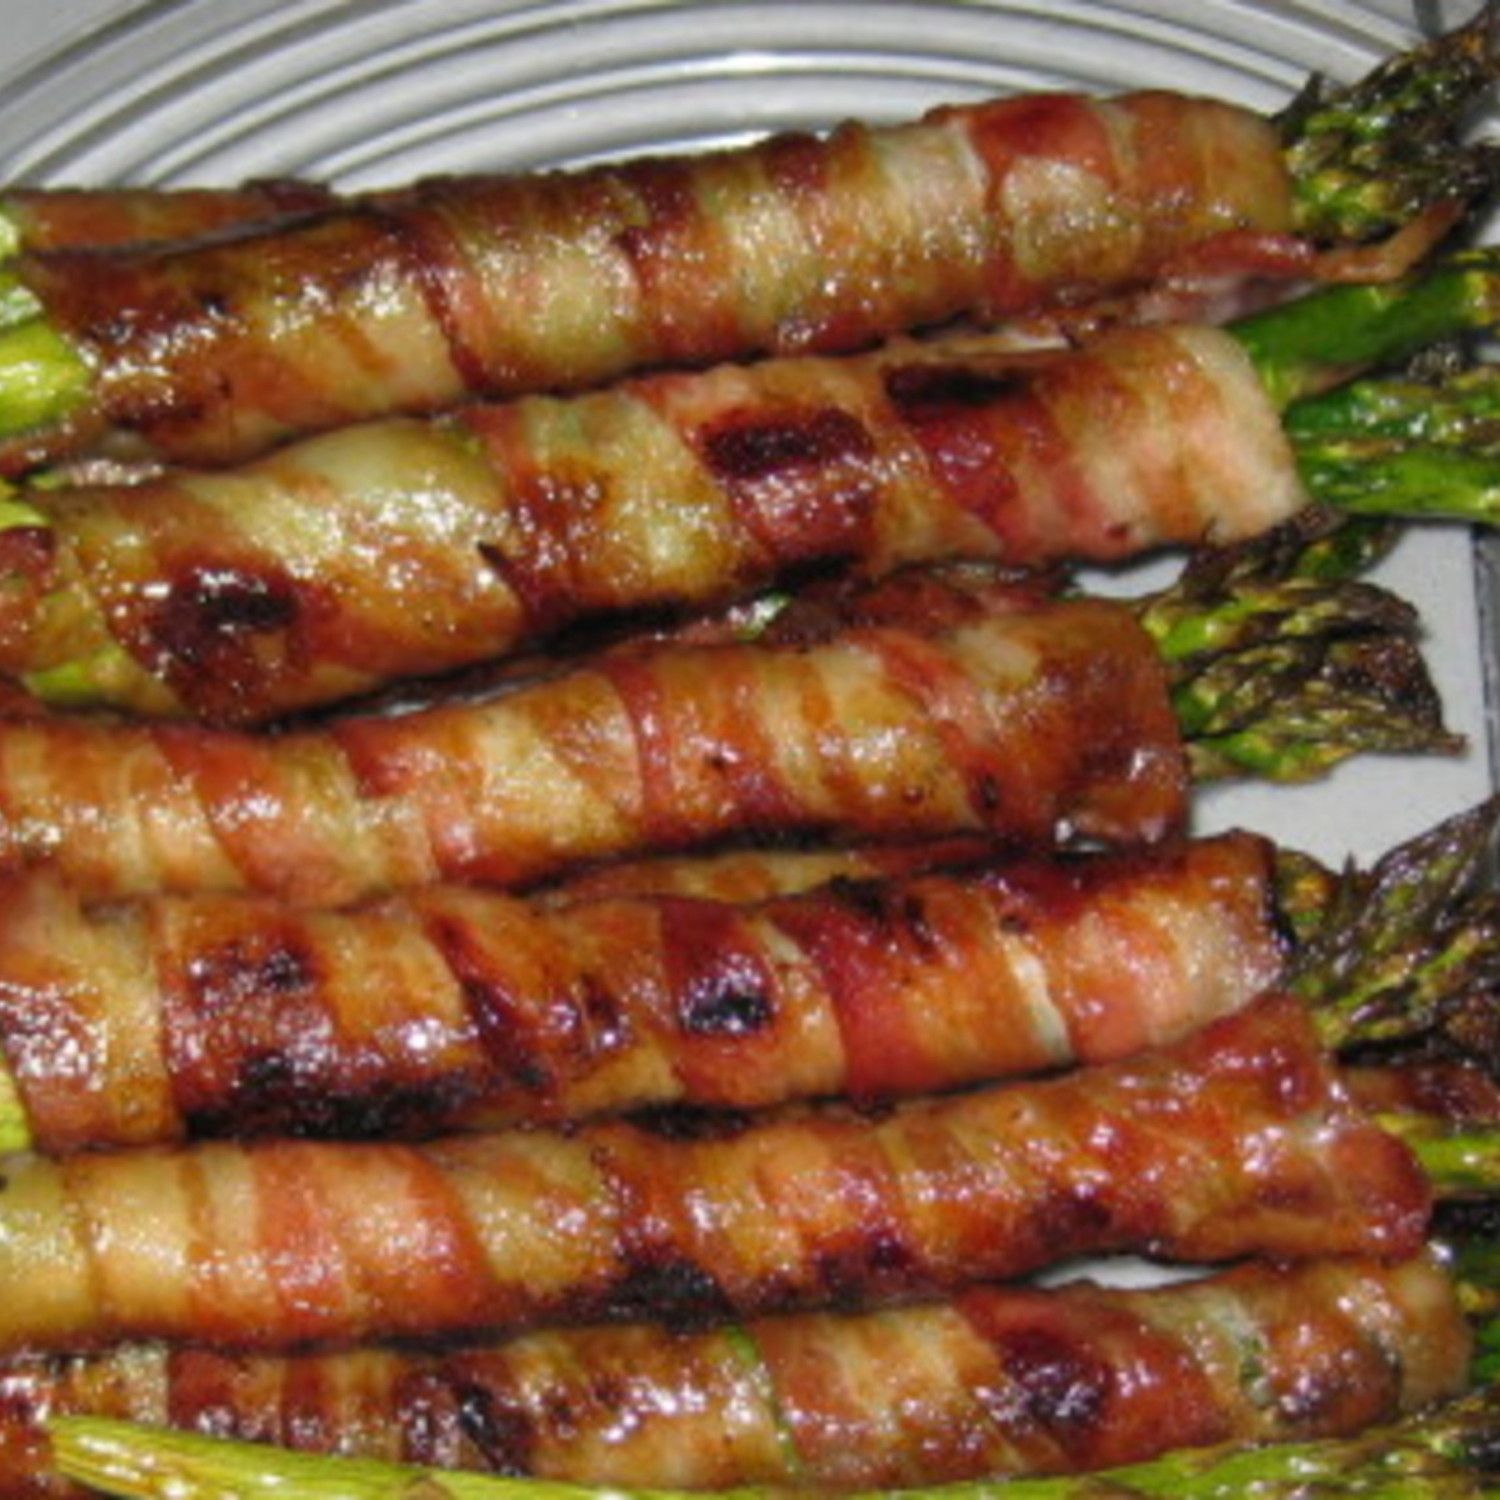 Bacon-Wrapped Asparagus – butter, brown sugar, garlic & soy sauce… Sounds heavenly!